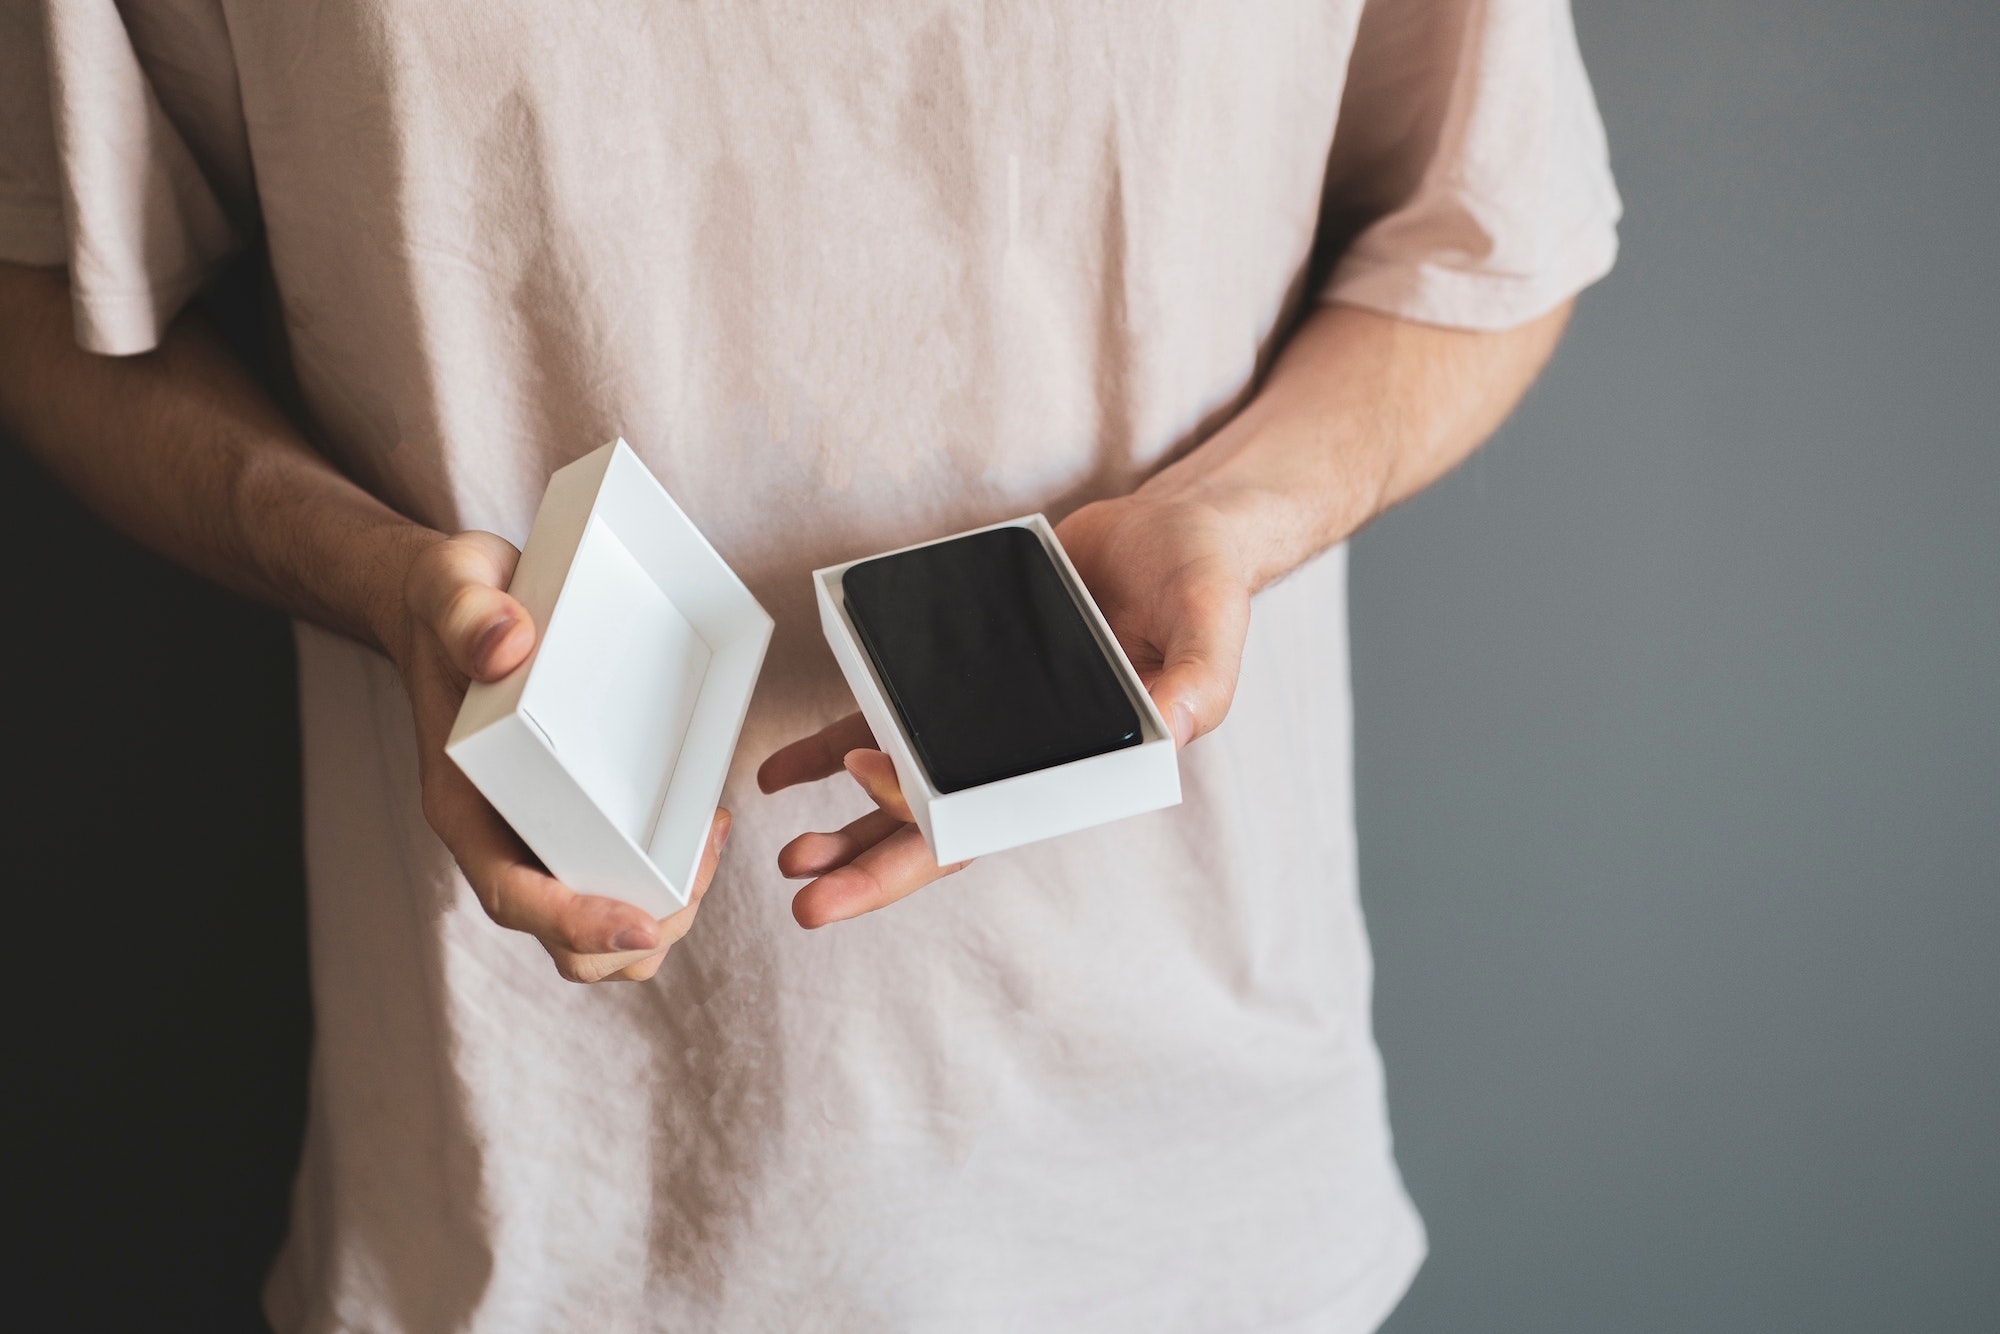 a person holds the new smartphone box or case and unpack it, holiday surprise present concept